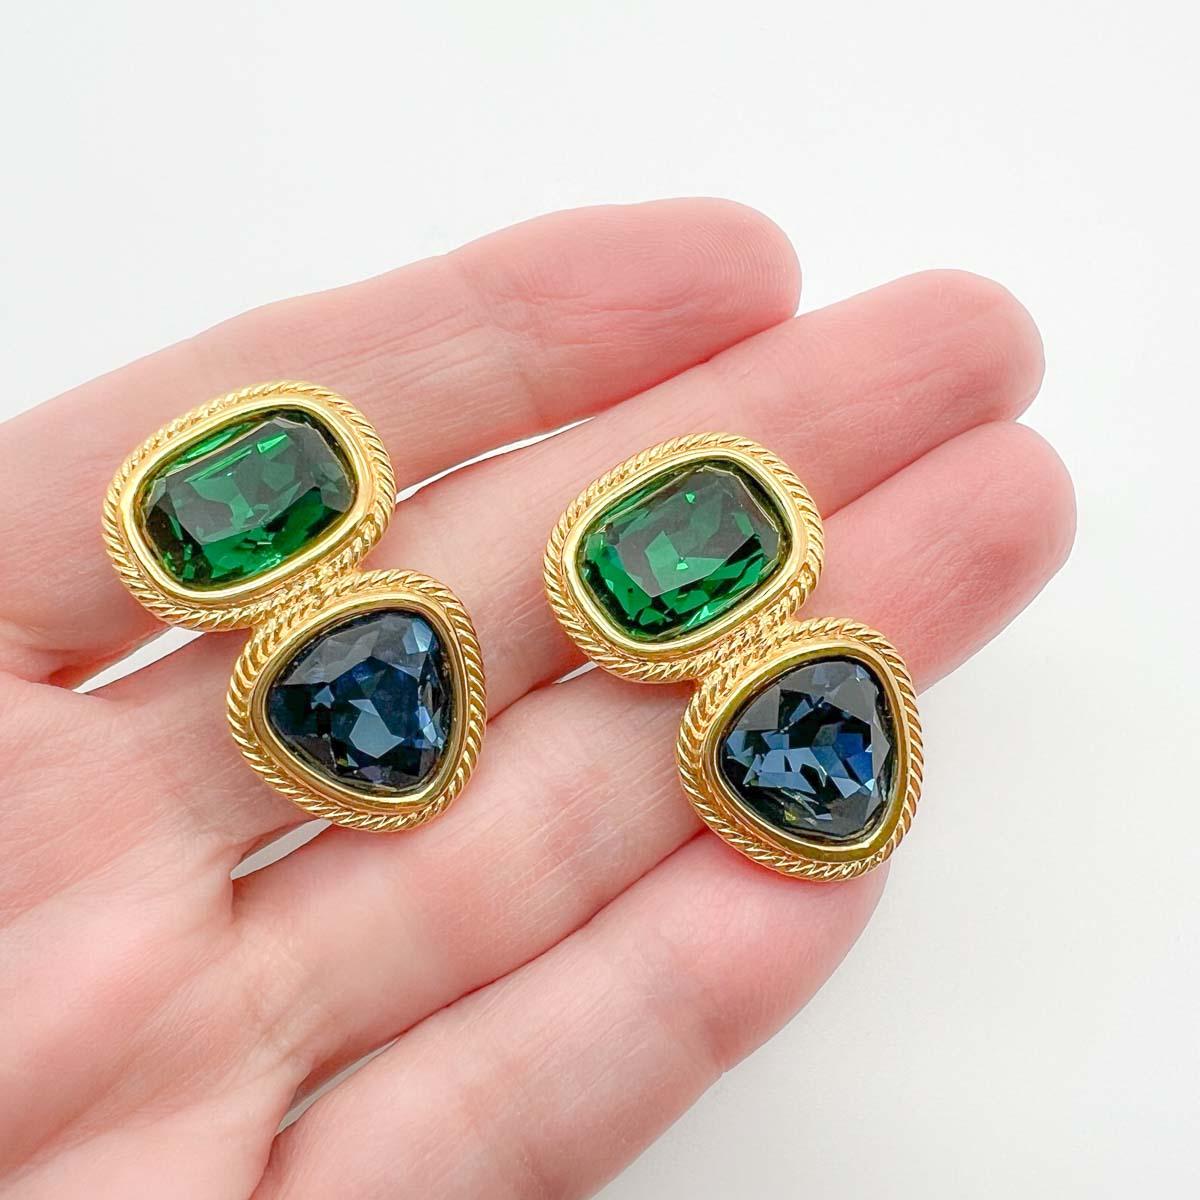 Vintage Napier Crystal Earrings. Heavenly deep emerald green and deep sapphire blue combine in a lustrous golden setting to create the most perfect finishing touch.
American costume jewellery company Napier founded in the 1880s were revered for